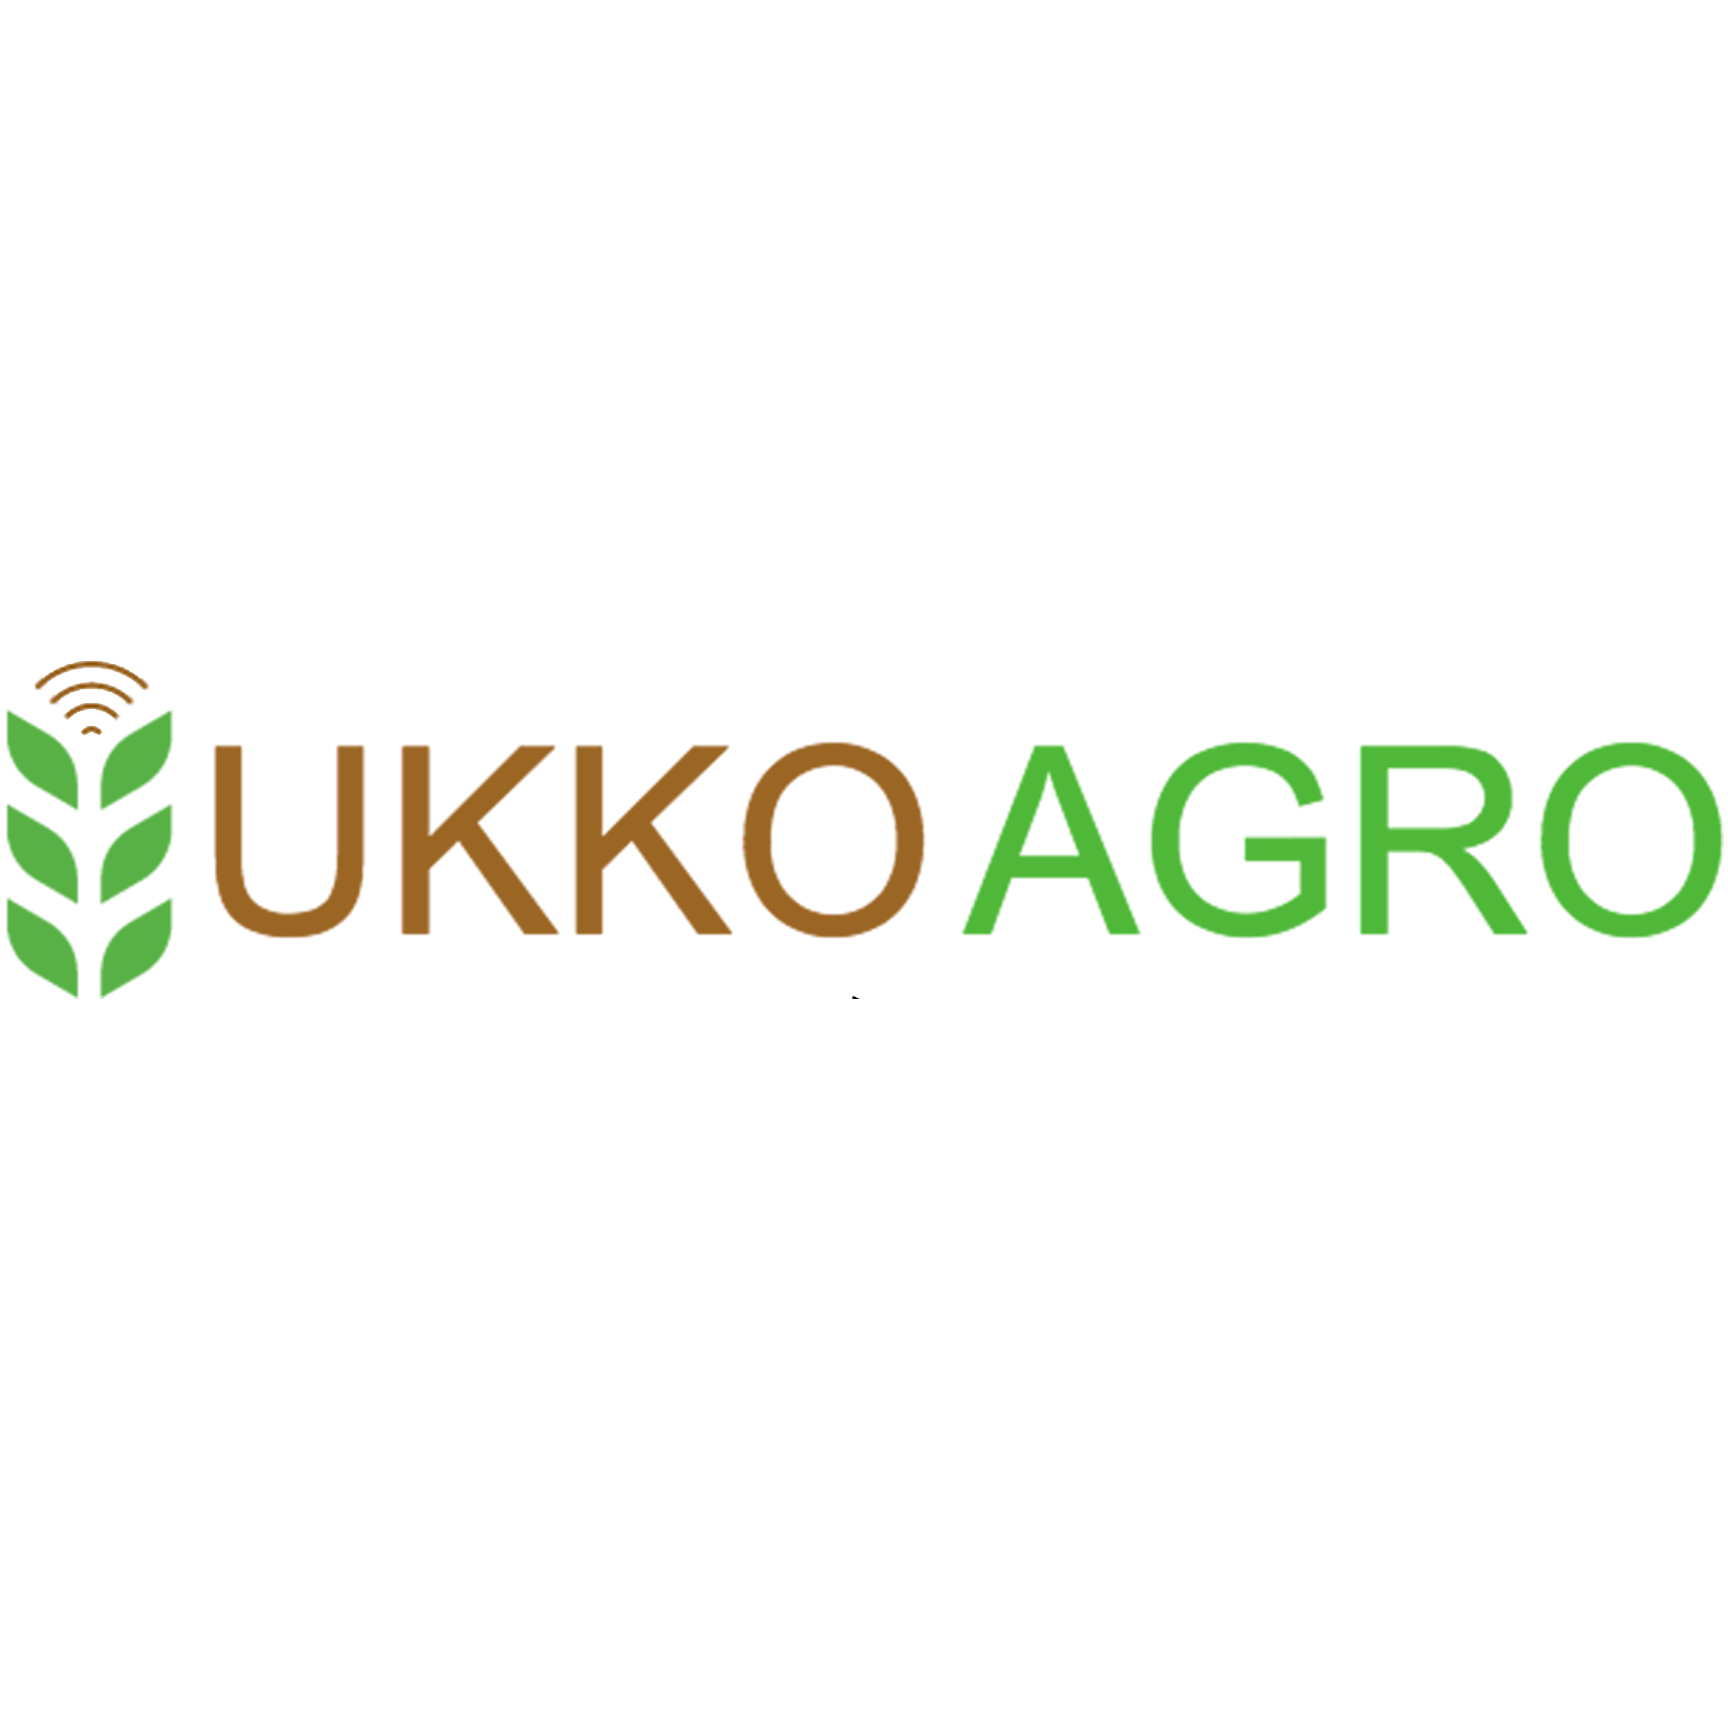 This is the logo for "Ukkoagro". "Ukko" is in brown text and "Agro" is in green text.